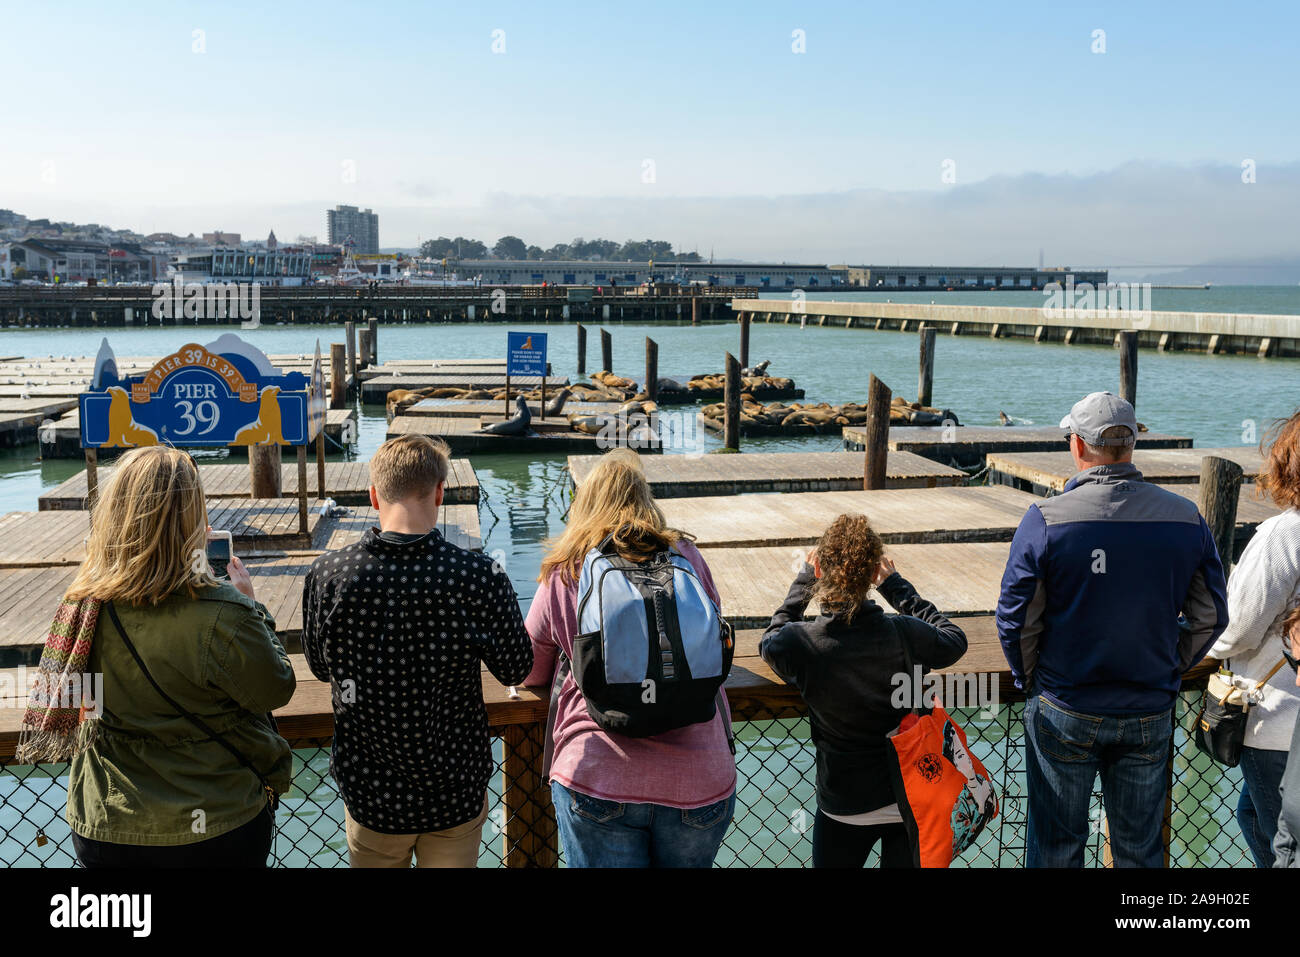 San Francisco,CA, USA - 10/18/2017: Tourists watching the world famous Sea Lions on Pier 39. Stock Photo